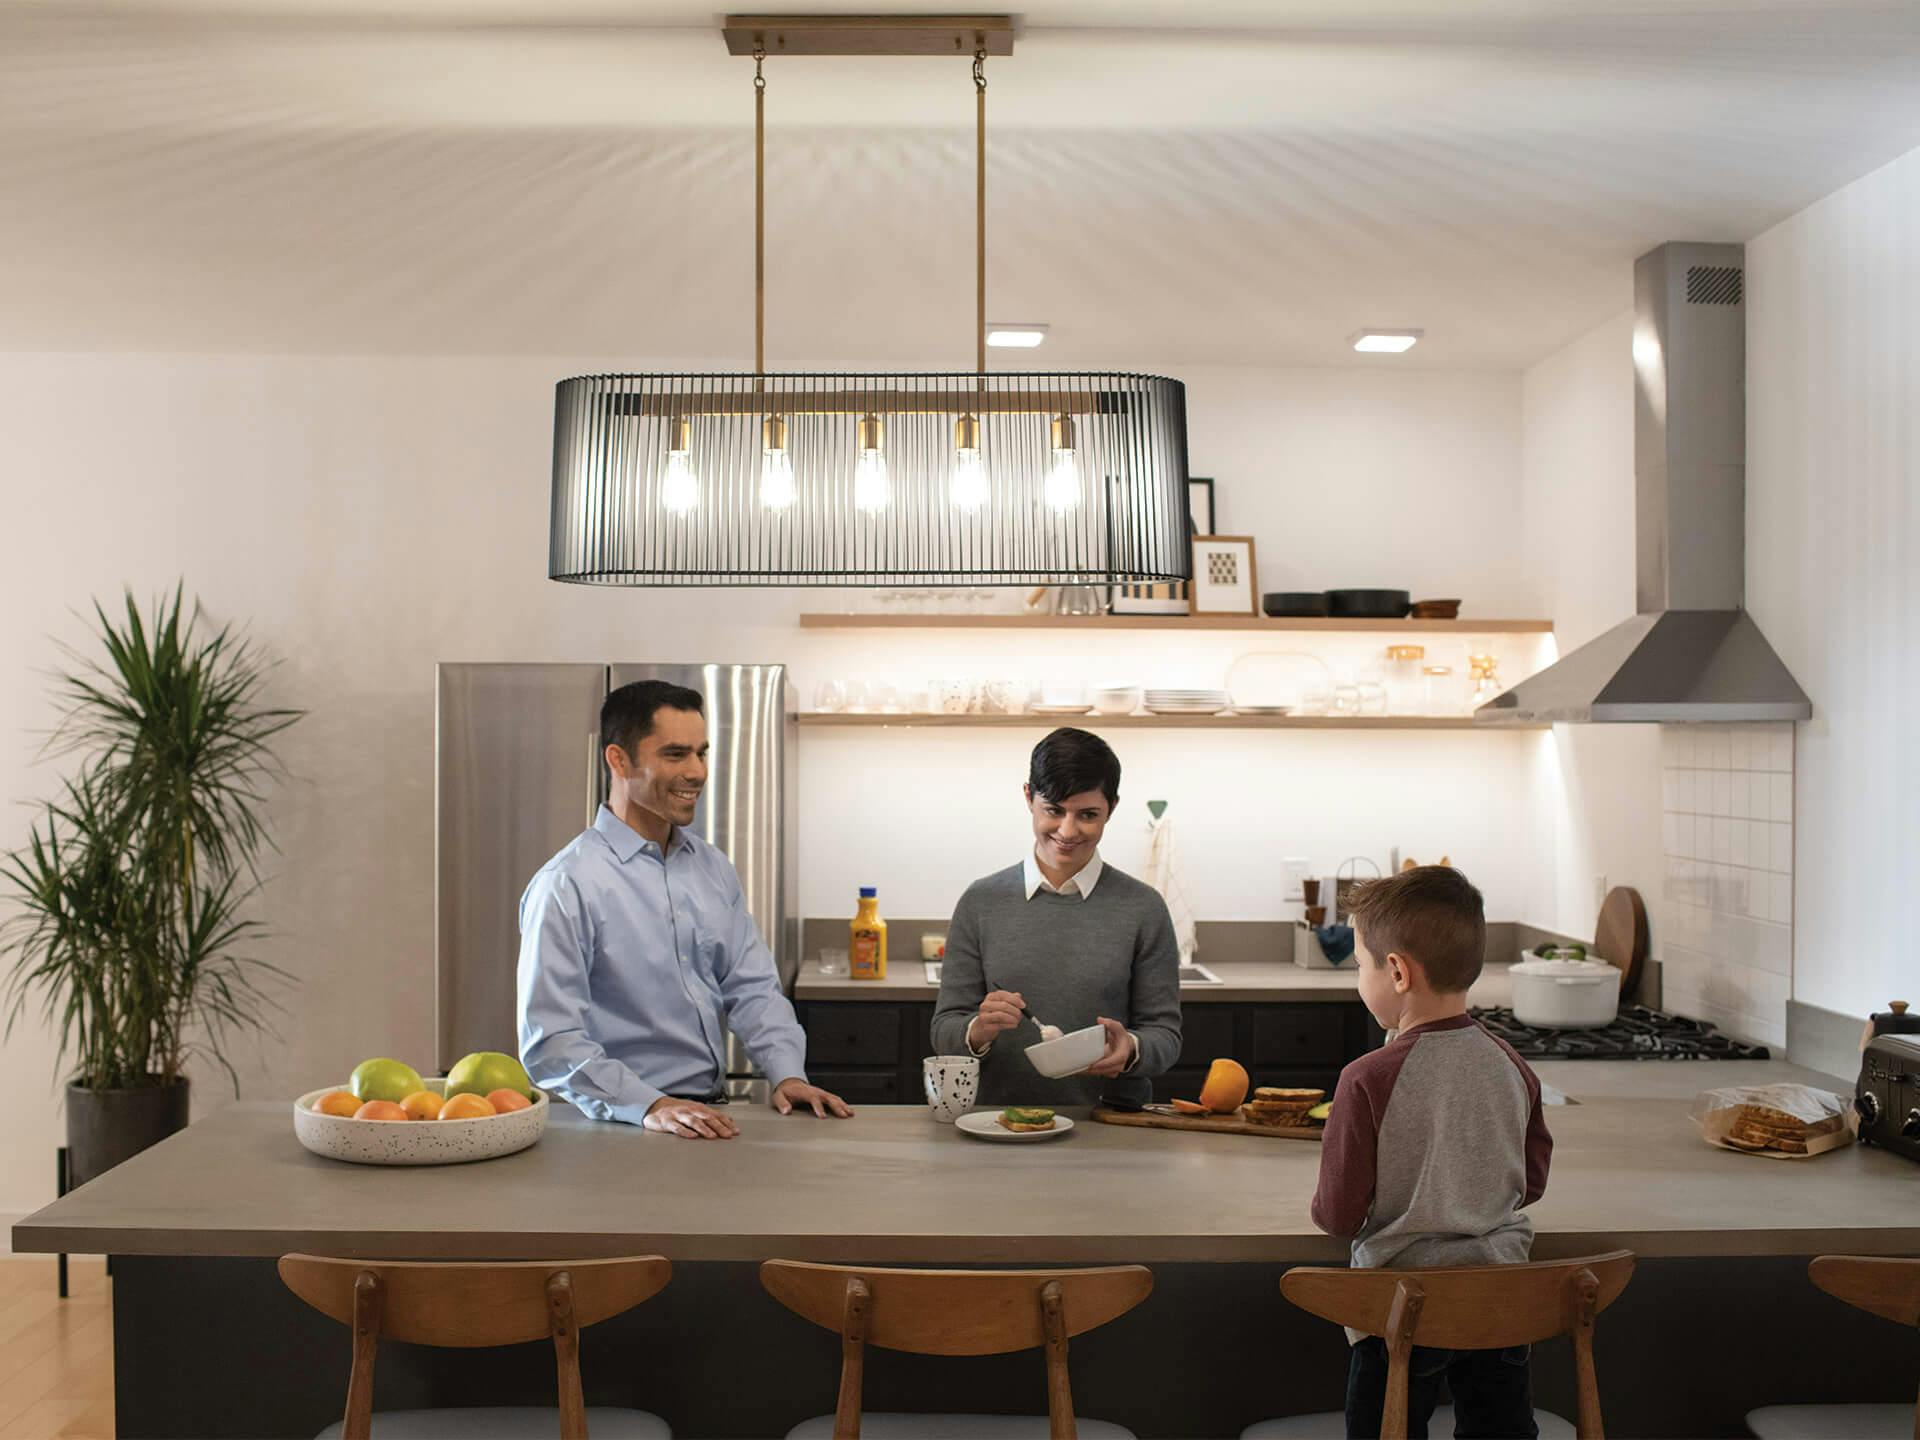 Kitchen with a family preparing breakfast on the island while a lit Linara chandelier hangs above with Zeo ceiling lights in the background